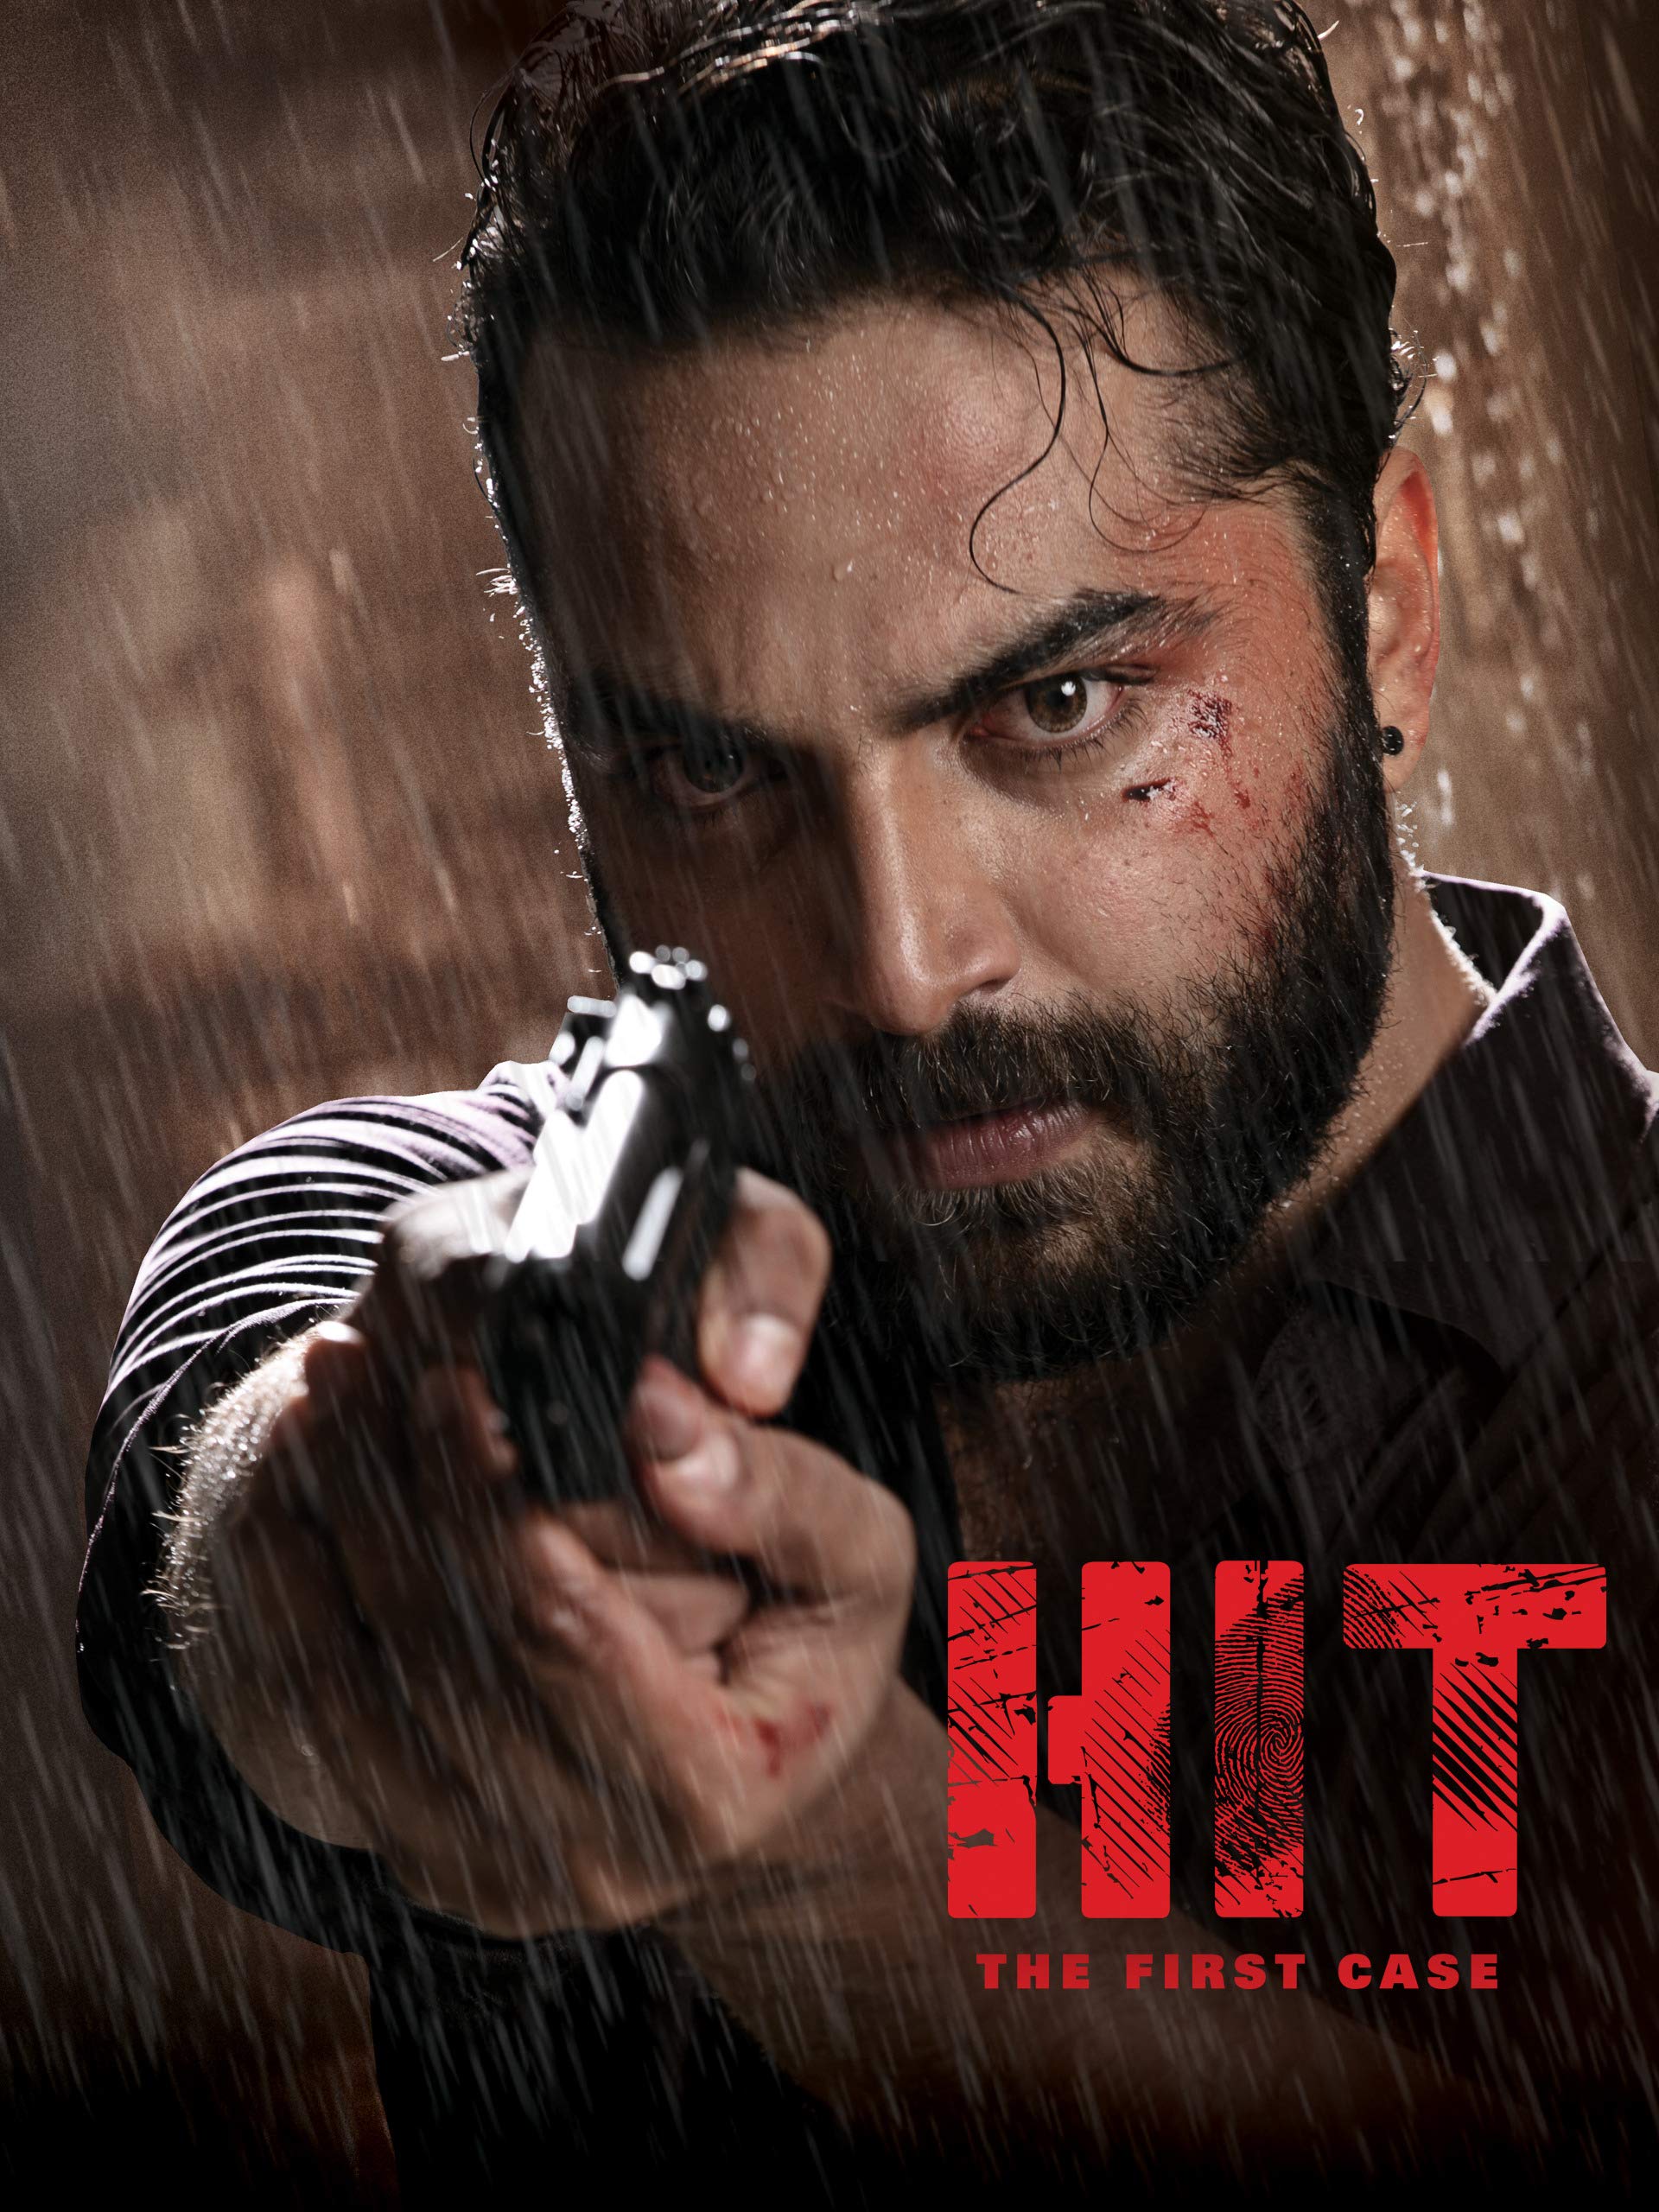 Hit – The First Case 2020 Hindi Dubbed ORG UNCUT 480p HDRip x264 ESub 400MB Download